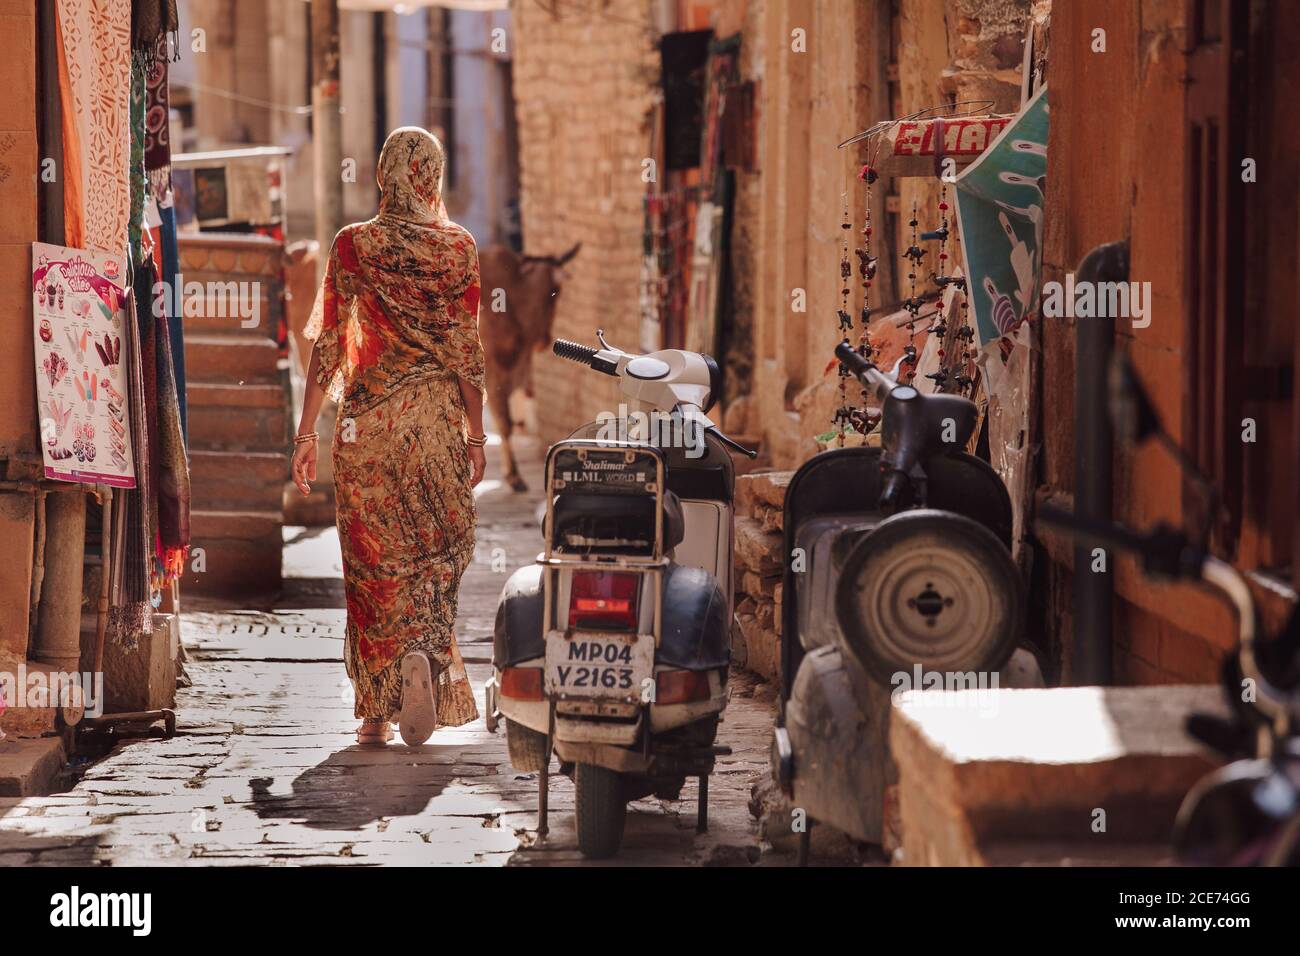 India - OCTOBER 29, 2012: Back view of unrecognizable female in traditional clothes walking near motorcycle on narrow street of old town Stock Photo